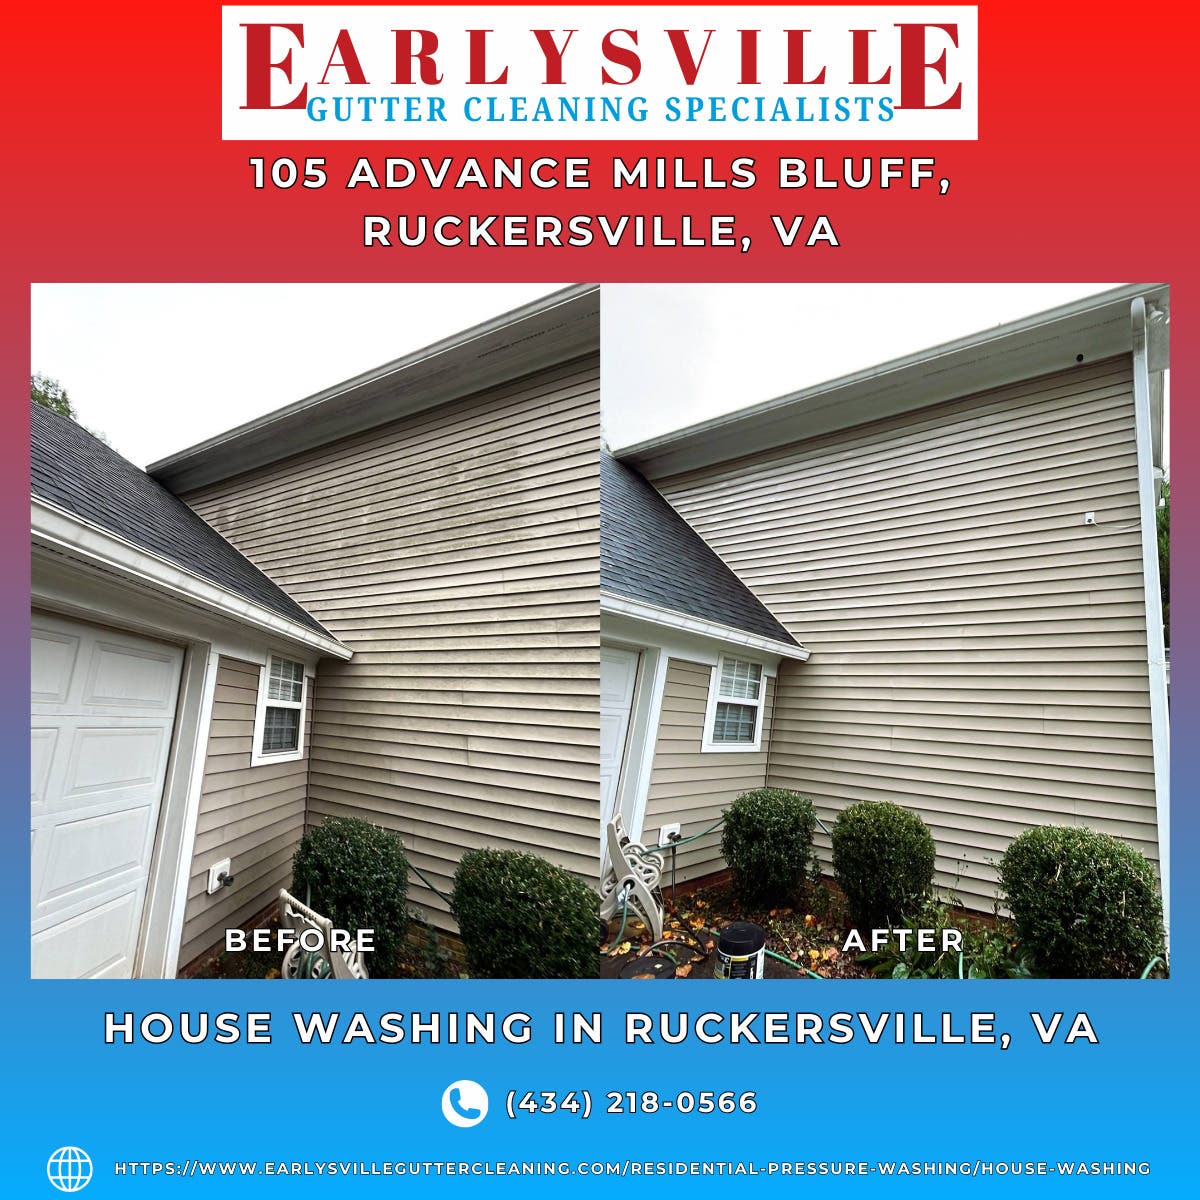 House Washing in Ruckersville, VA - Earlysville Gutter Cleaning Specialists